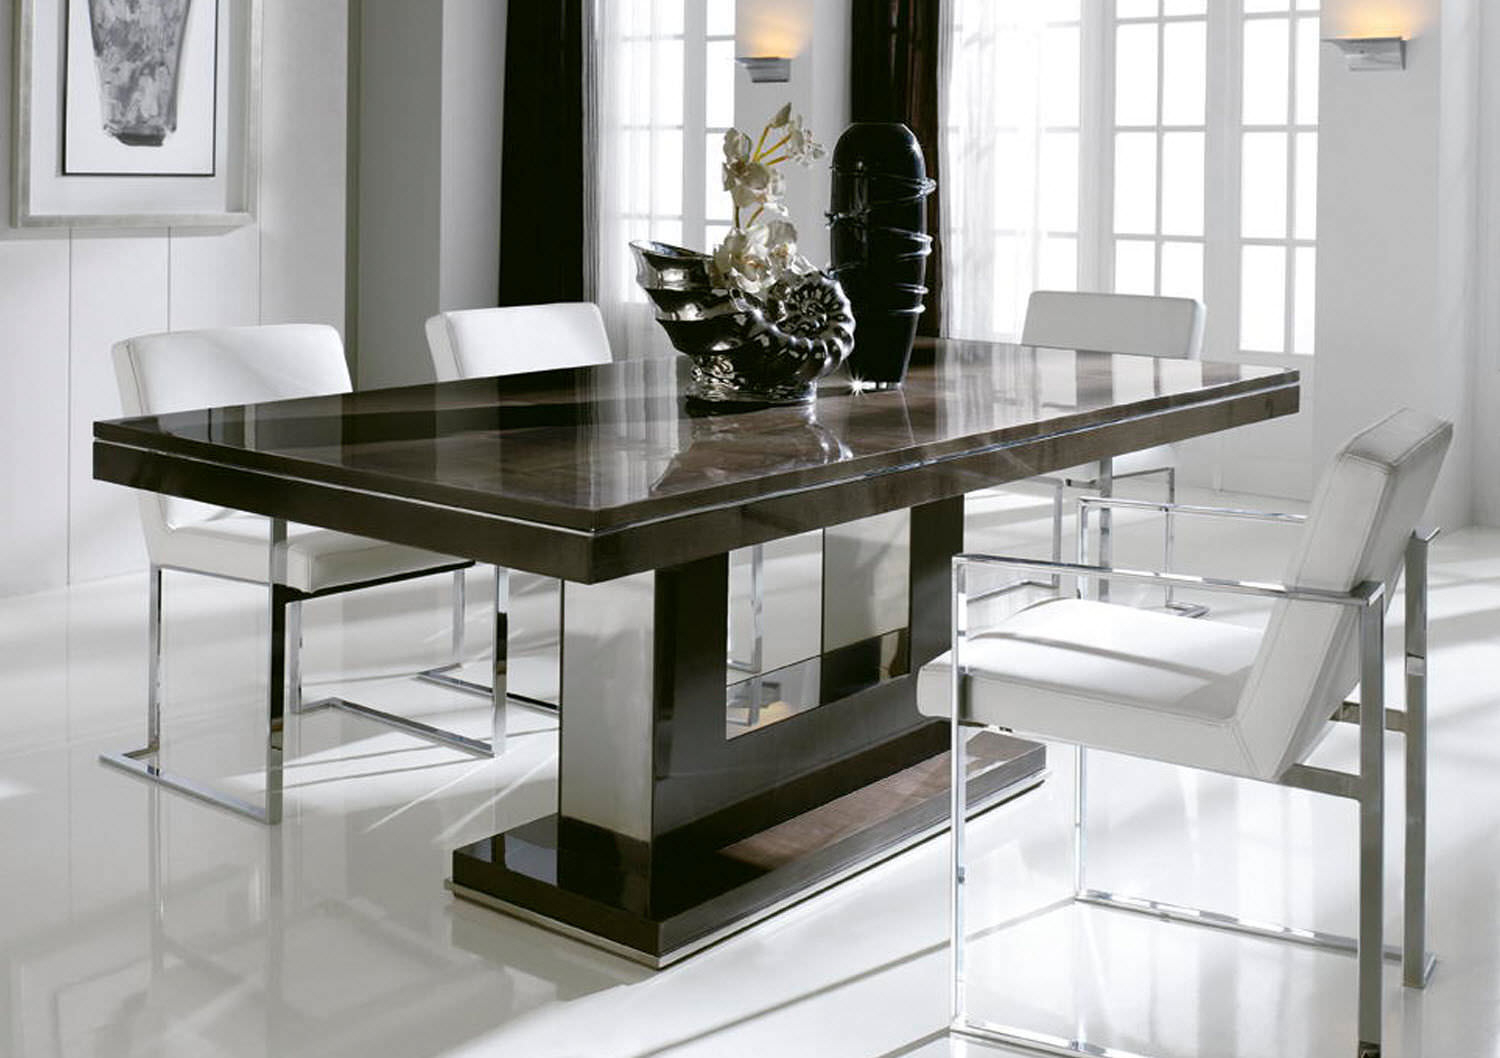 Unusual Dining Table And Chairs Uk • Faucet Ideas Site High Dining Room Tables